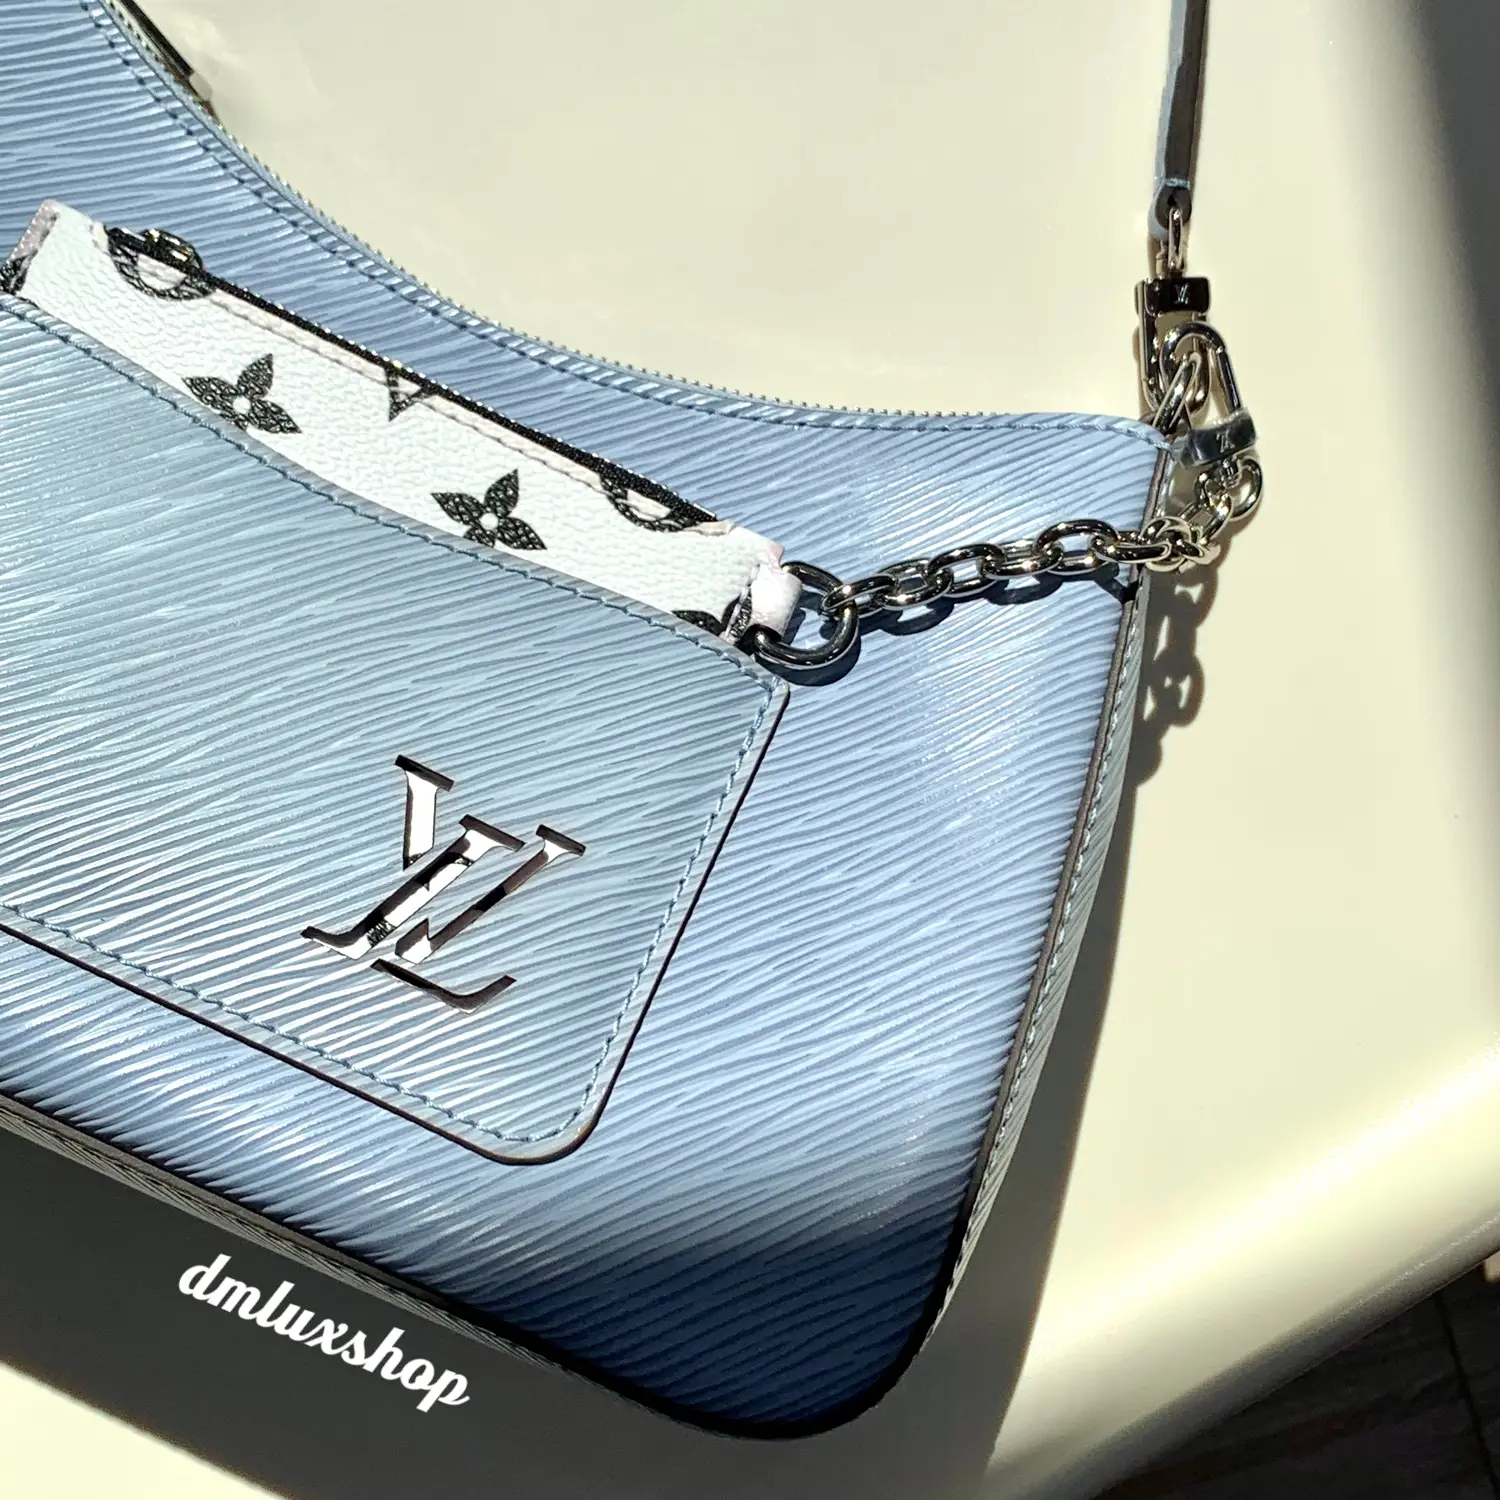 The BEST Louis Vuitton bag EVER made! #luxury #fashion #louisvuitton  #neverfull 